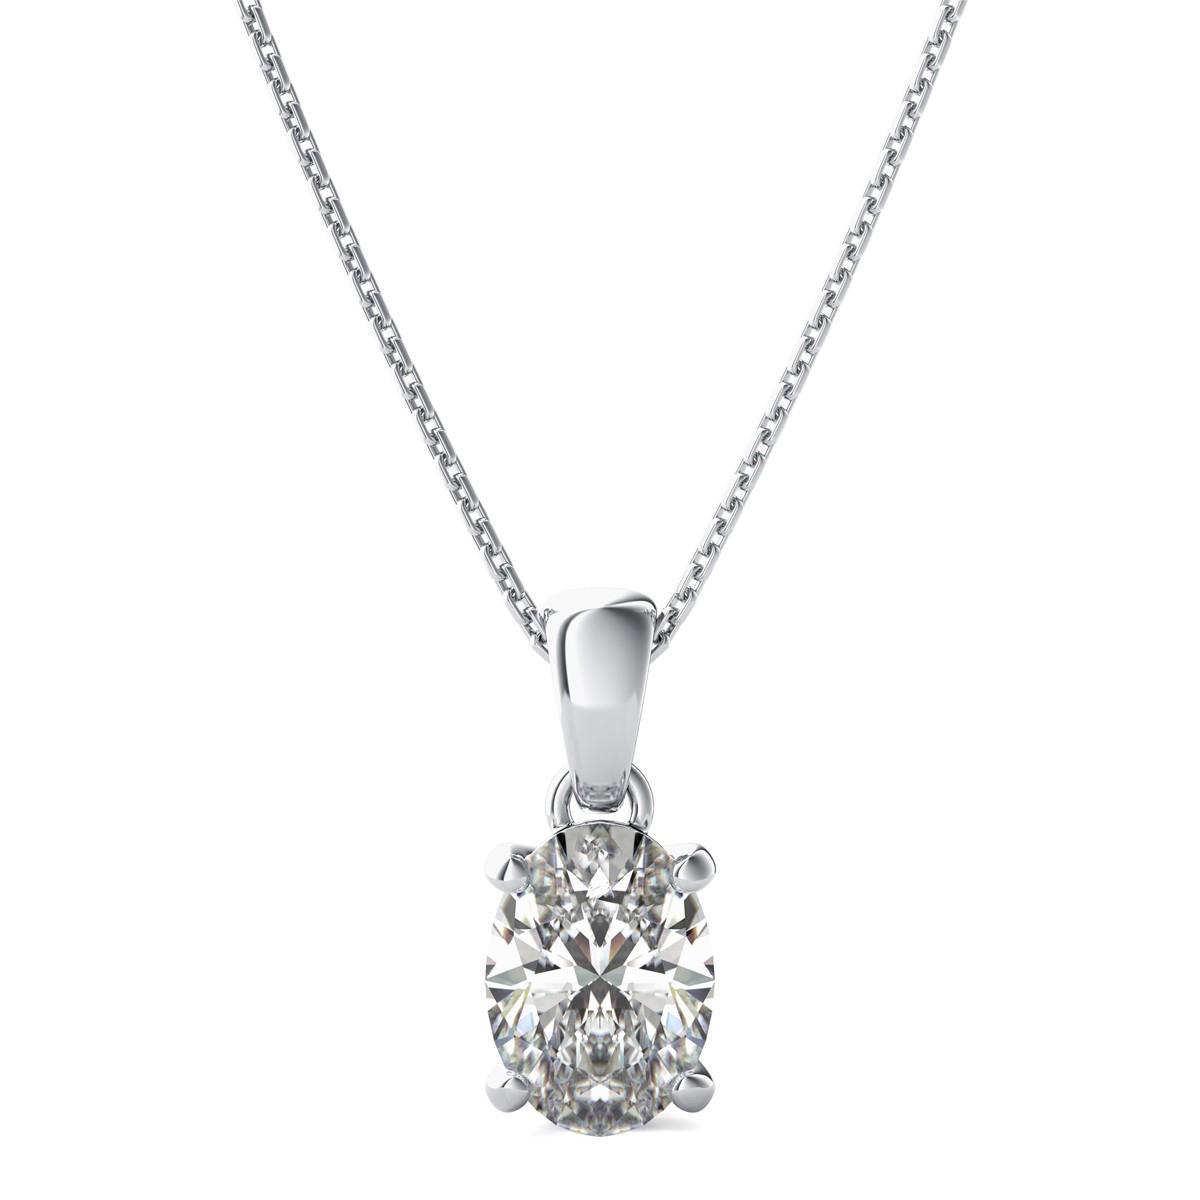 Oval Pendant Necklace 2.75 Carats Solitaire Diamond White Gold 14K - Pendant-harrychadent.ca